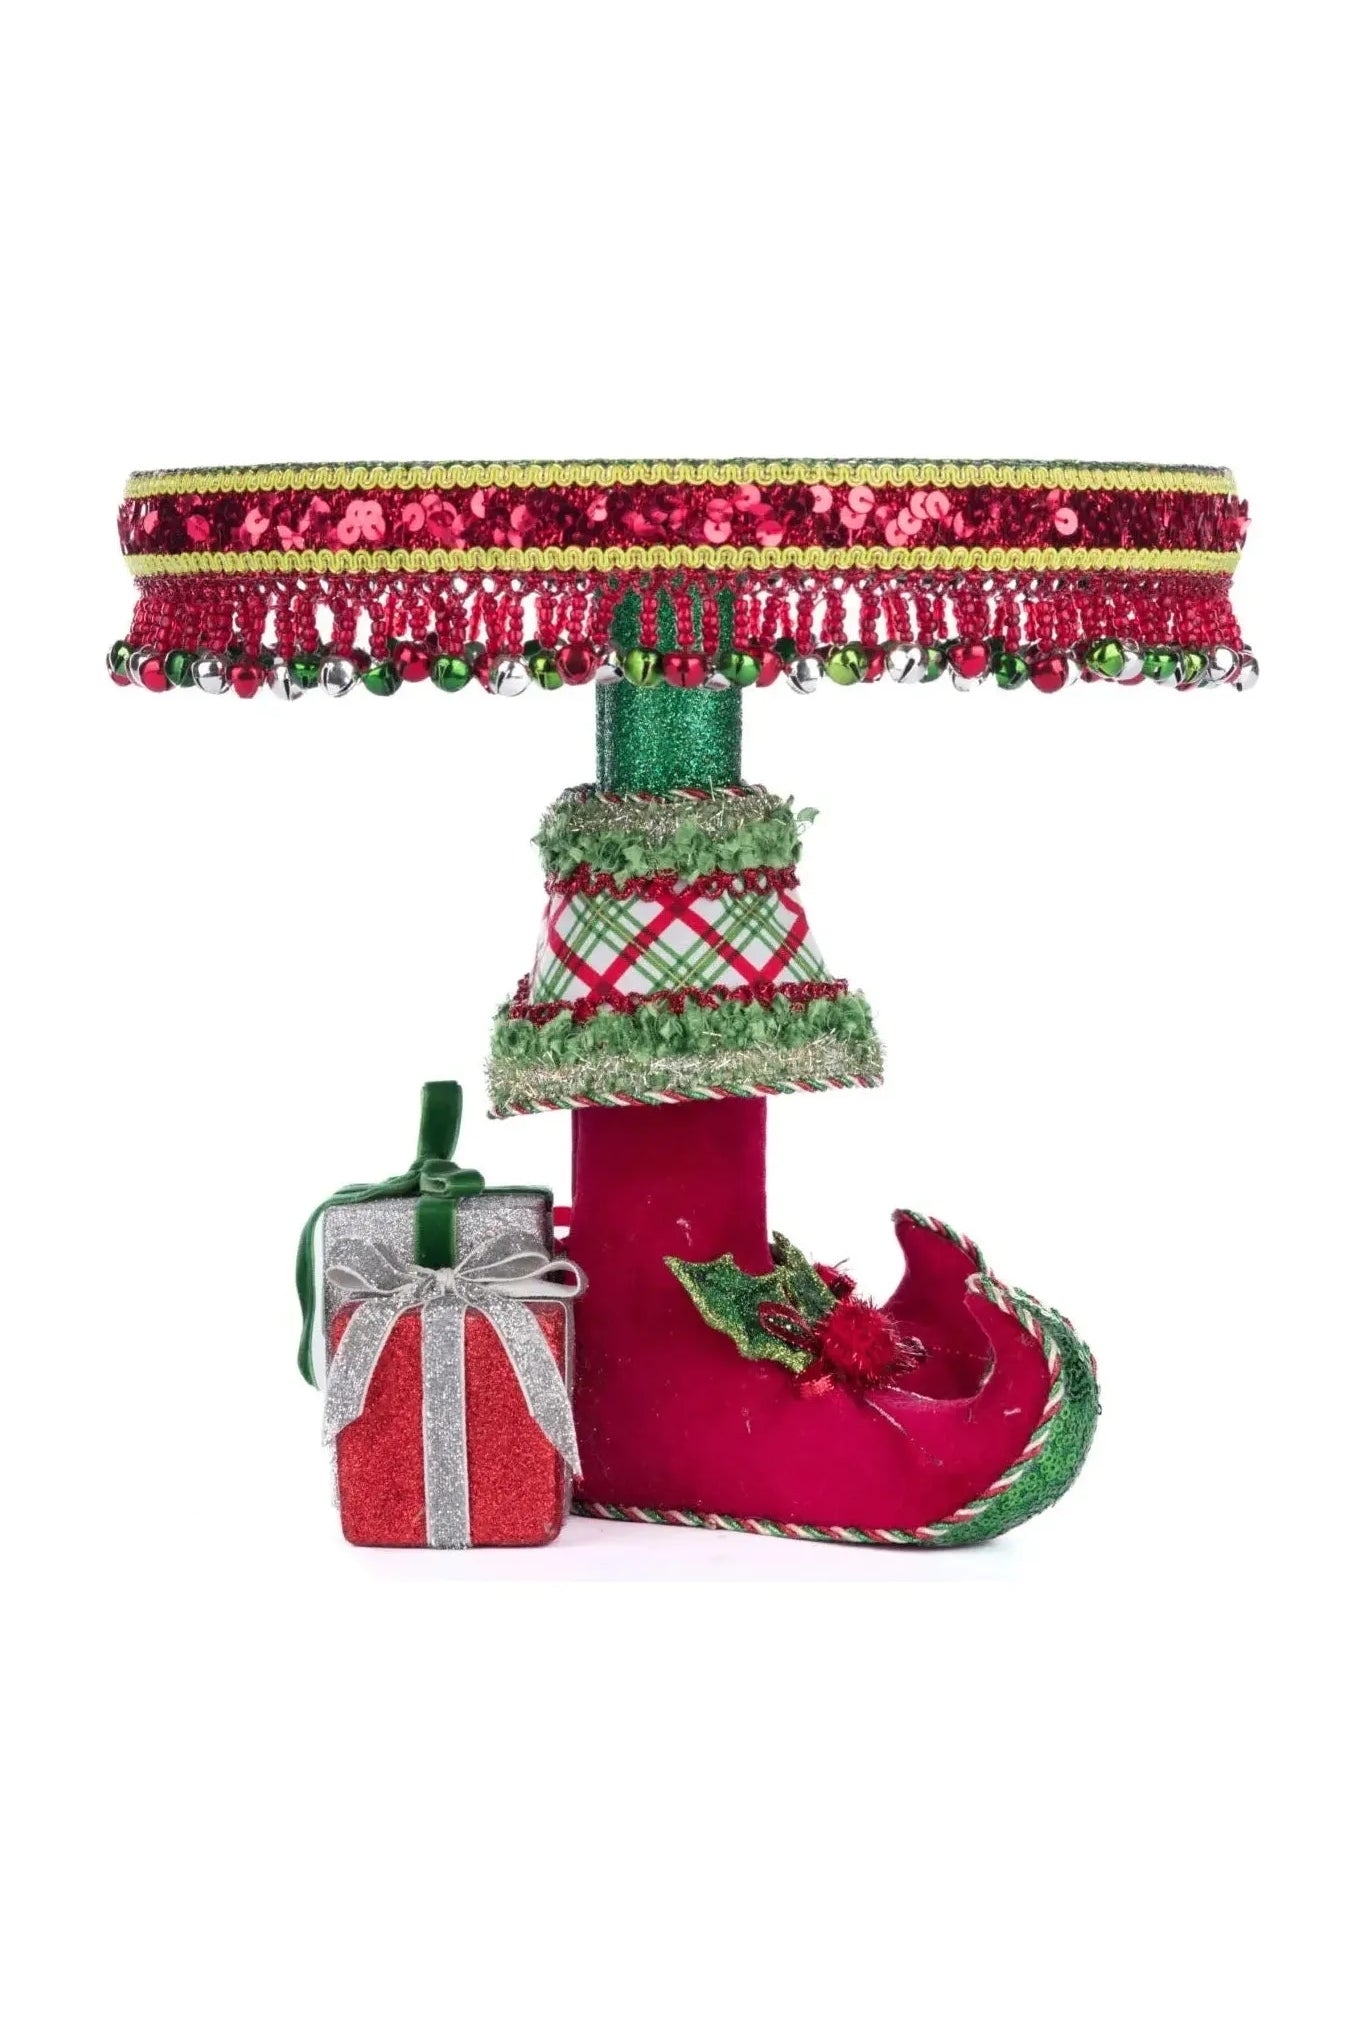 Shop For Elf Boots Cake Plate 28-428347